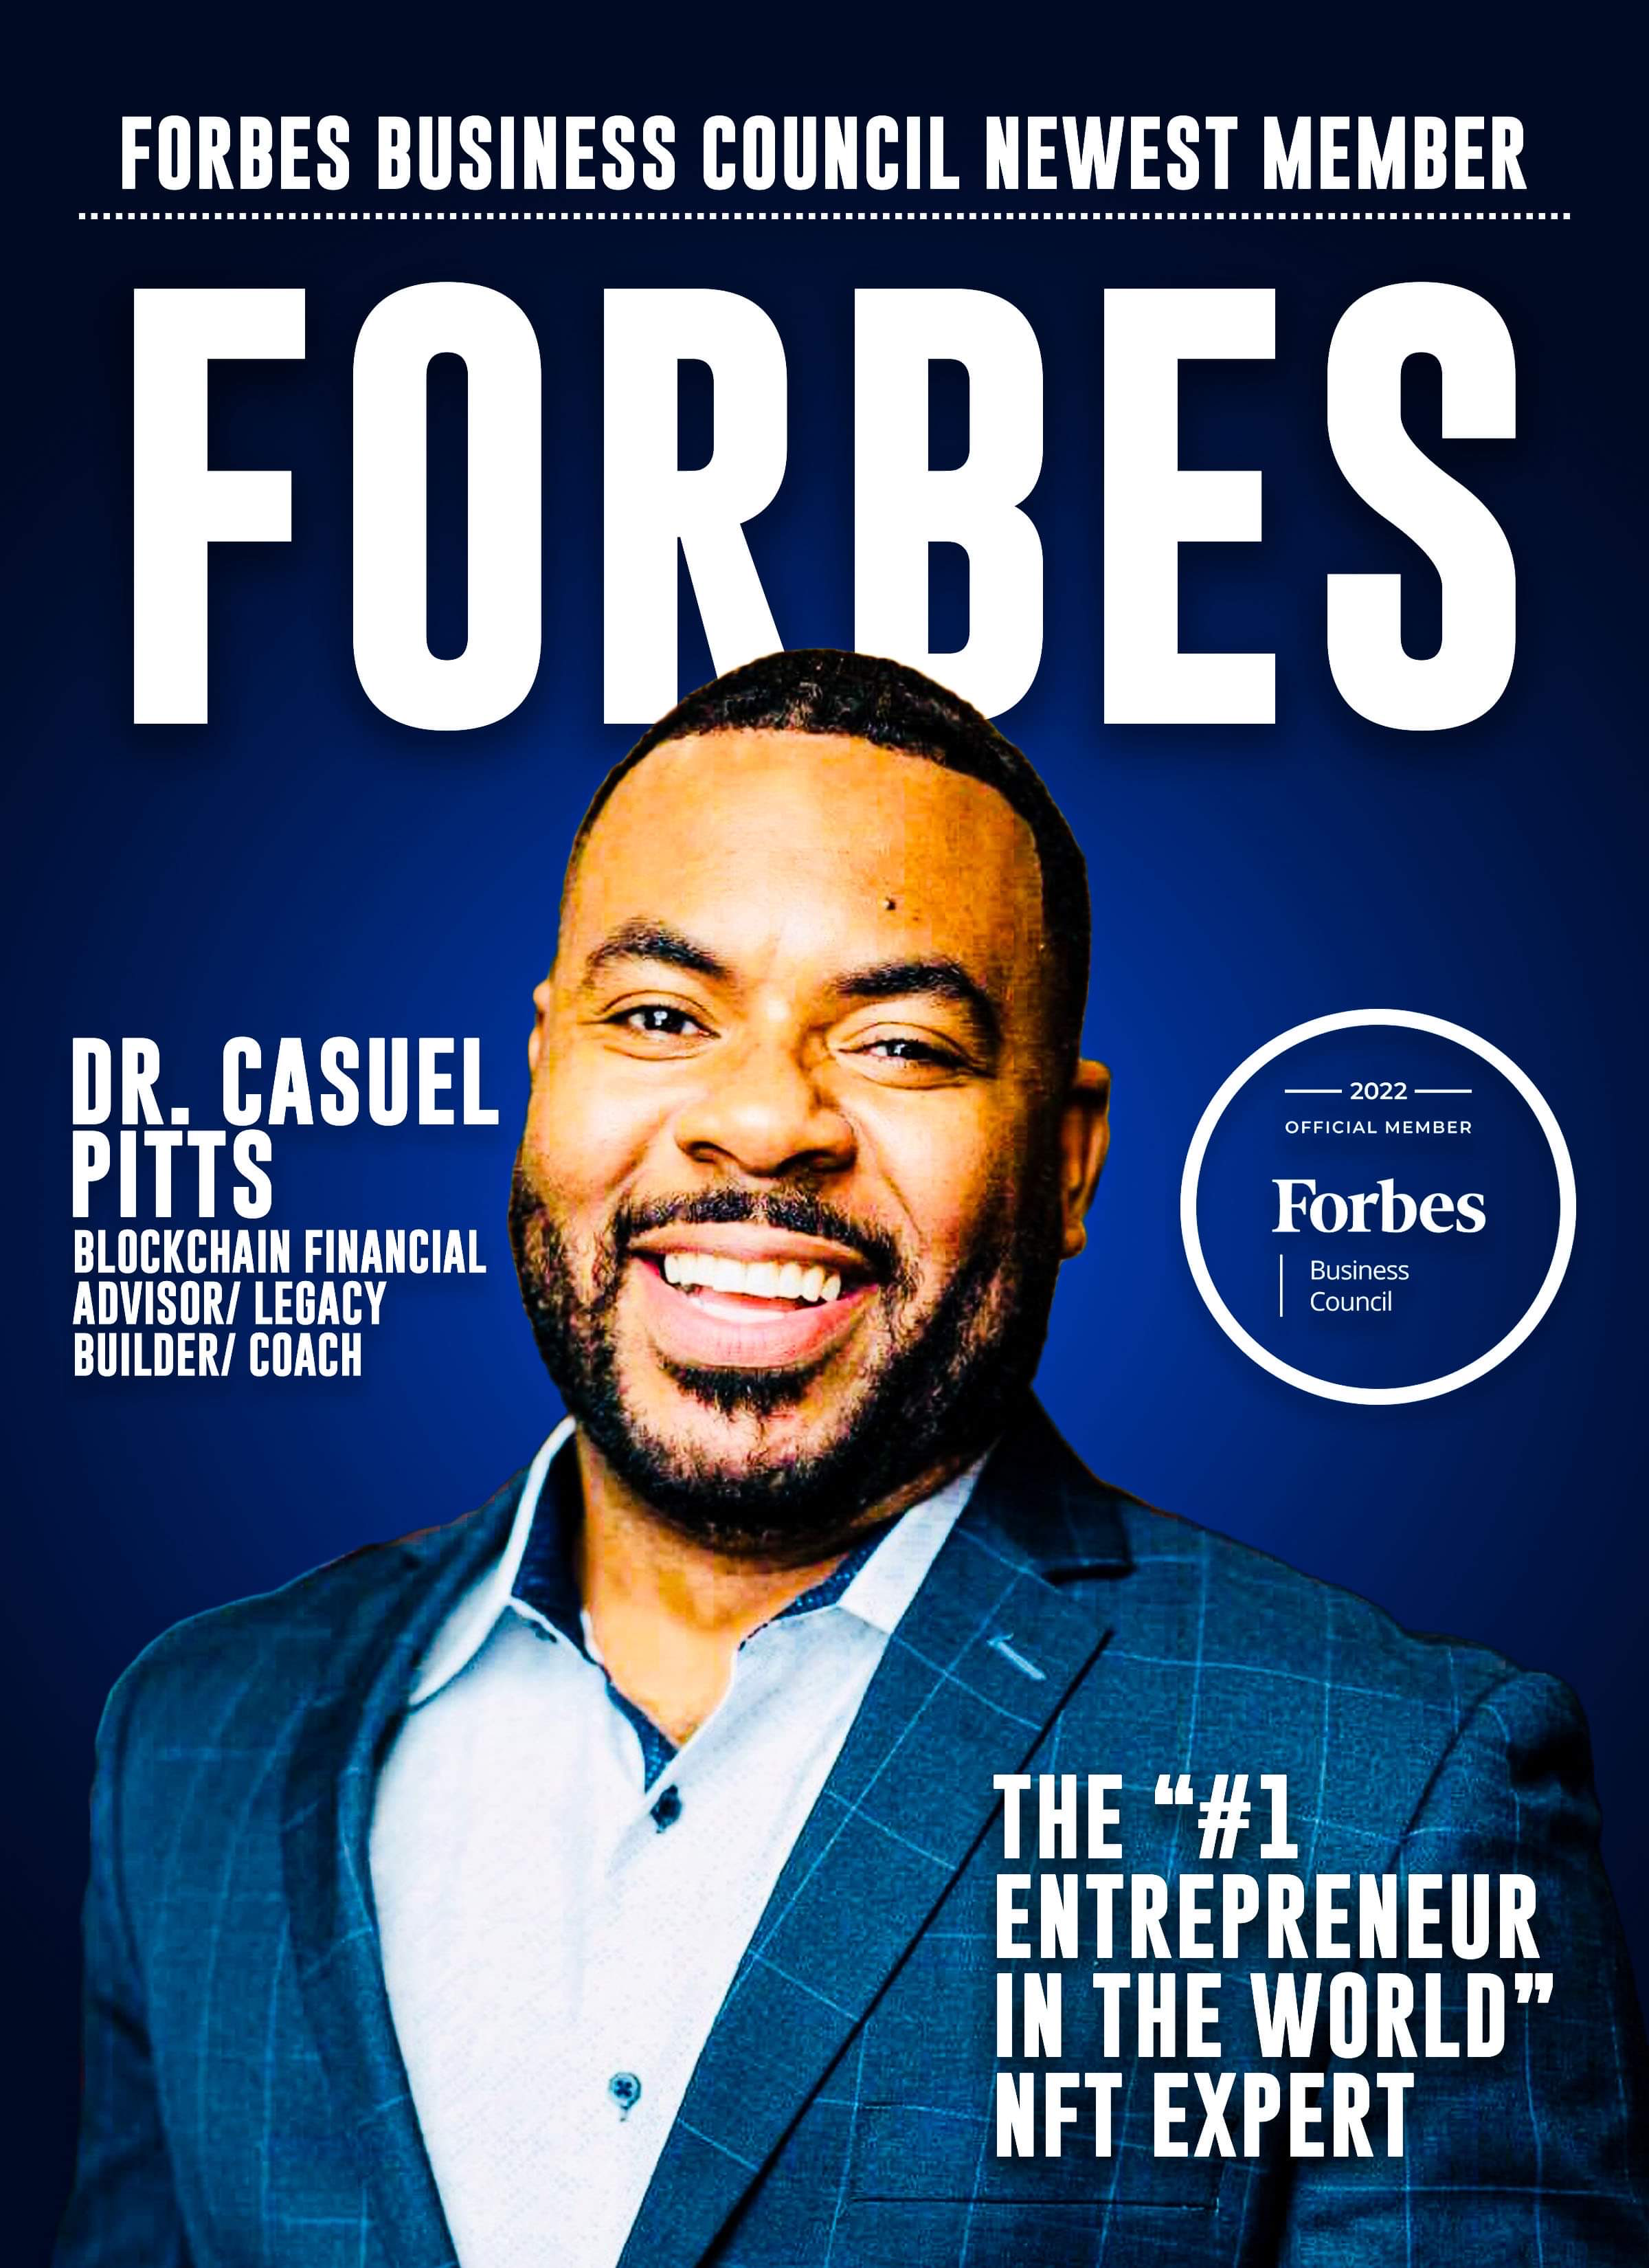 Dr. Casuel Pitts Has Joined The Forbes Business Council To Help Entrepreneurs Build Dynasties